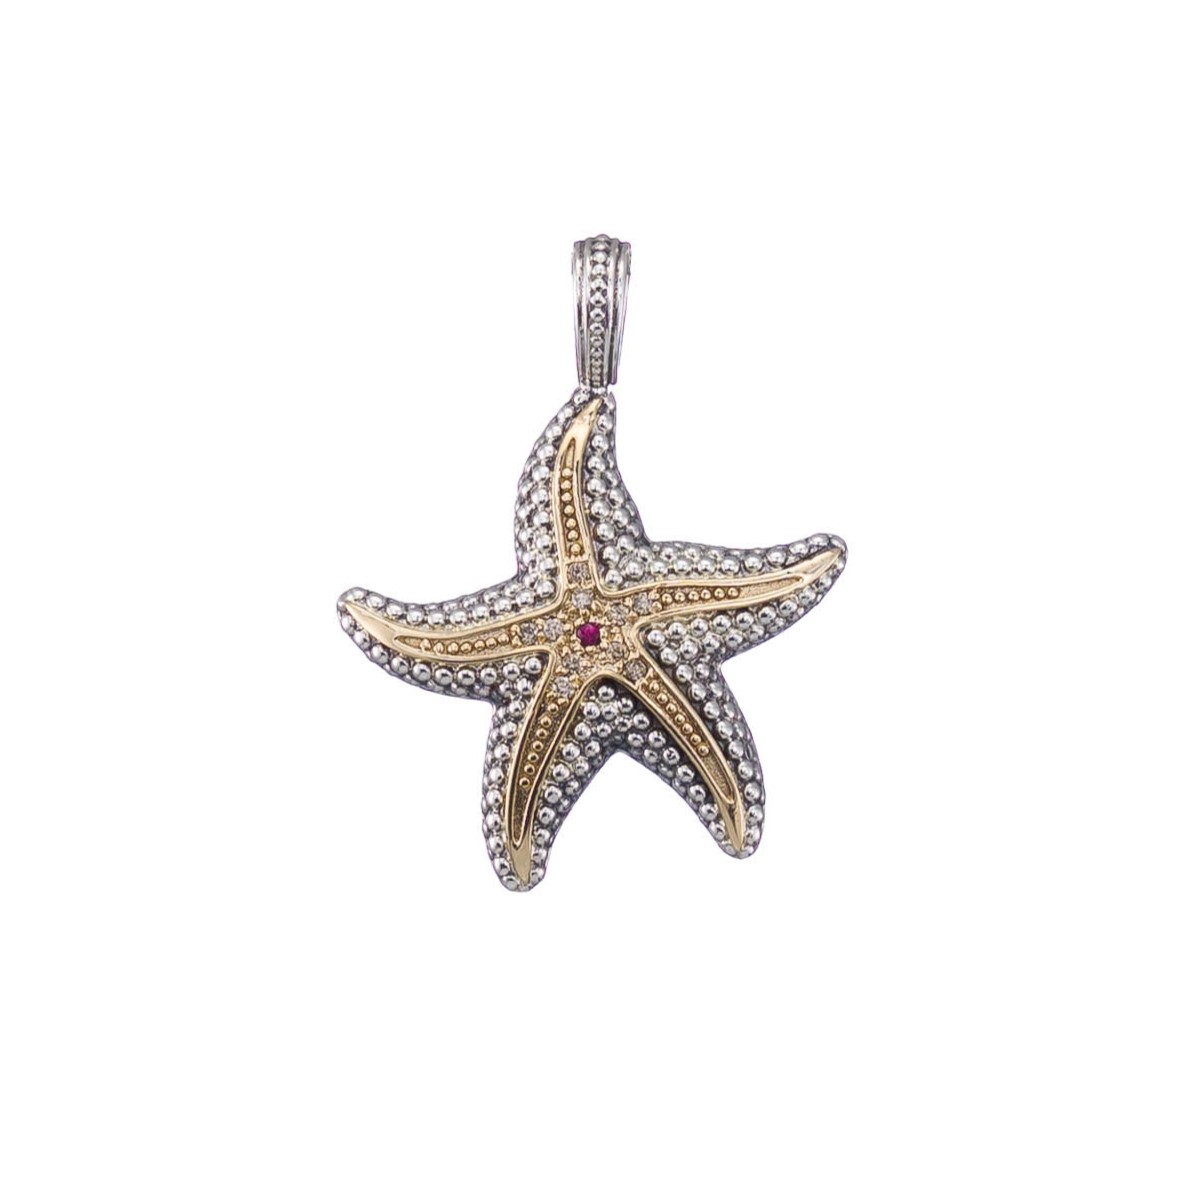 Starfish Pendant in 18K solid Yellow Gold and Sterling Silver with Precious stones